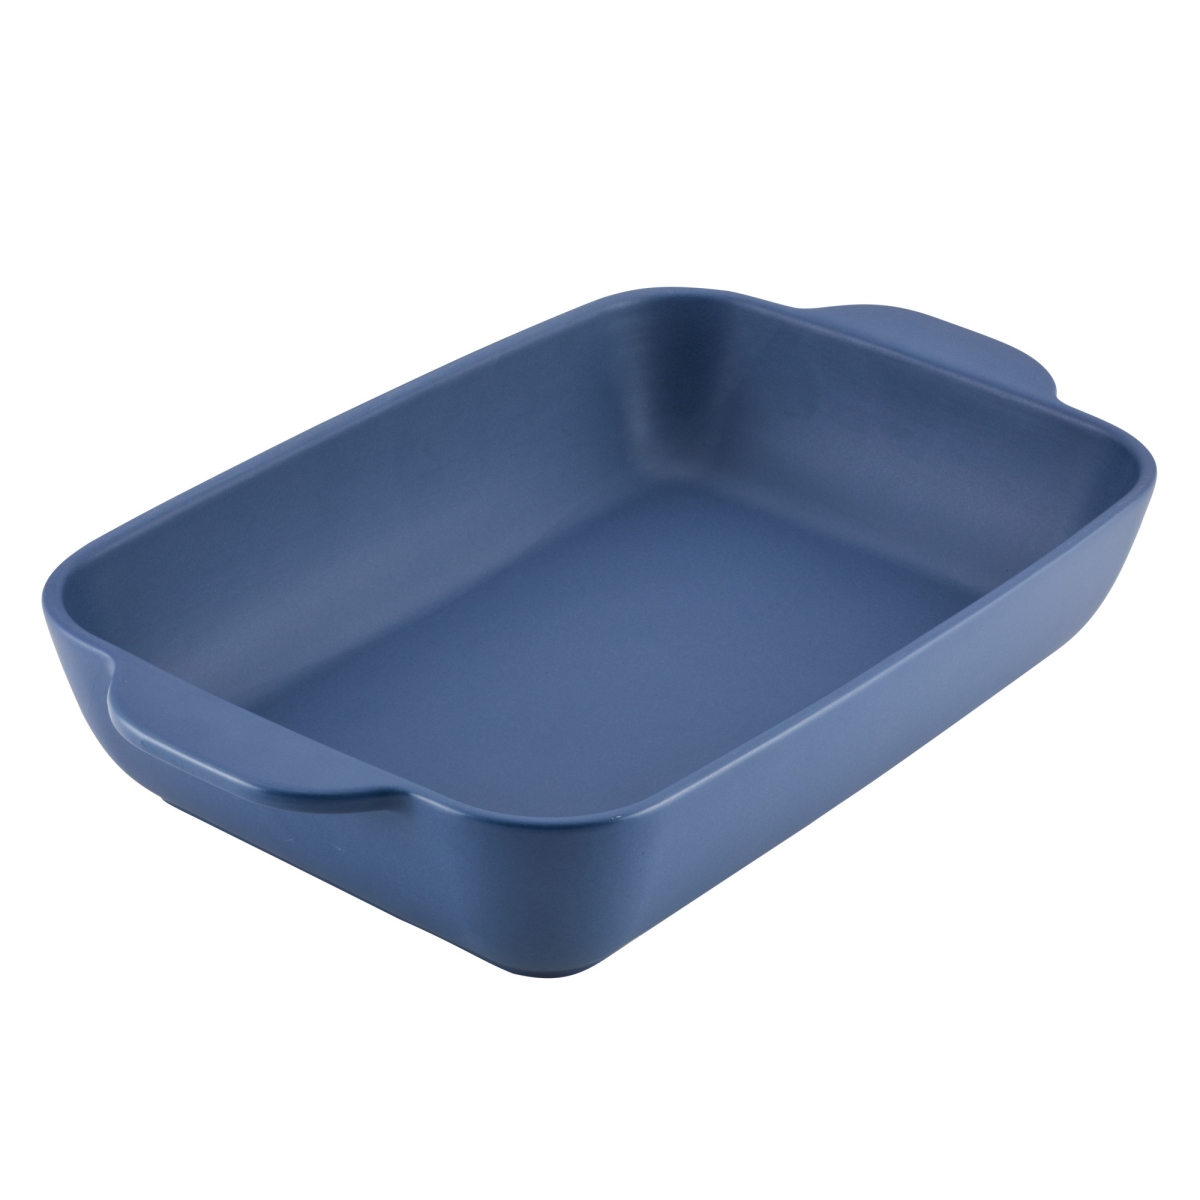 Picture of Ayesha Curry 48594 9 x 13 in. Rectangular Ceramic Baking Dish, Anchor Blue